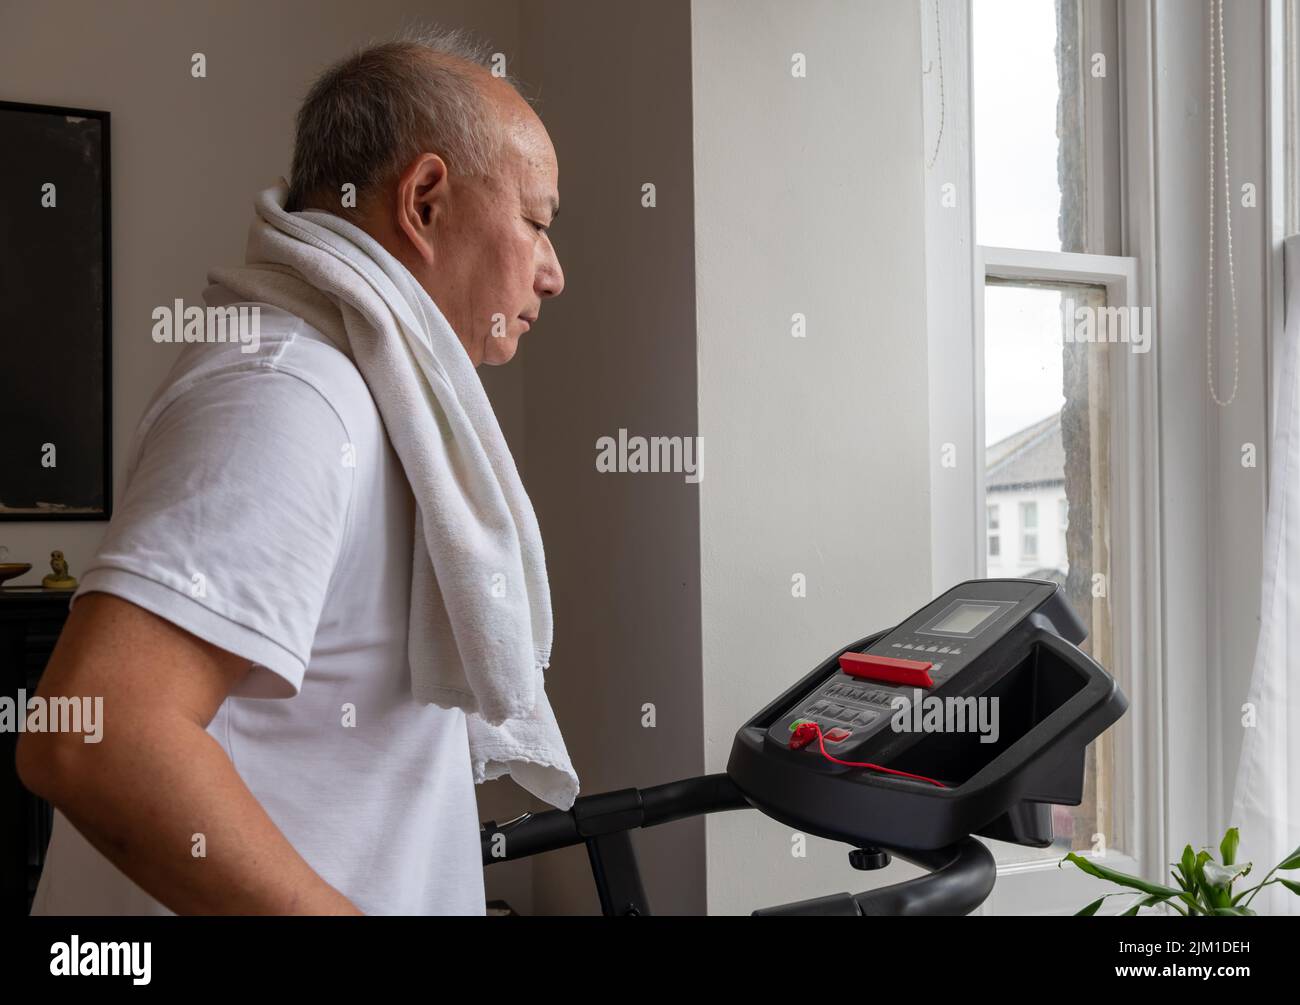 A senior man trying to keep fit working out on a treadmill at home. Stock Photo